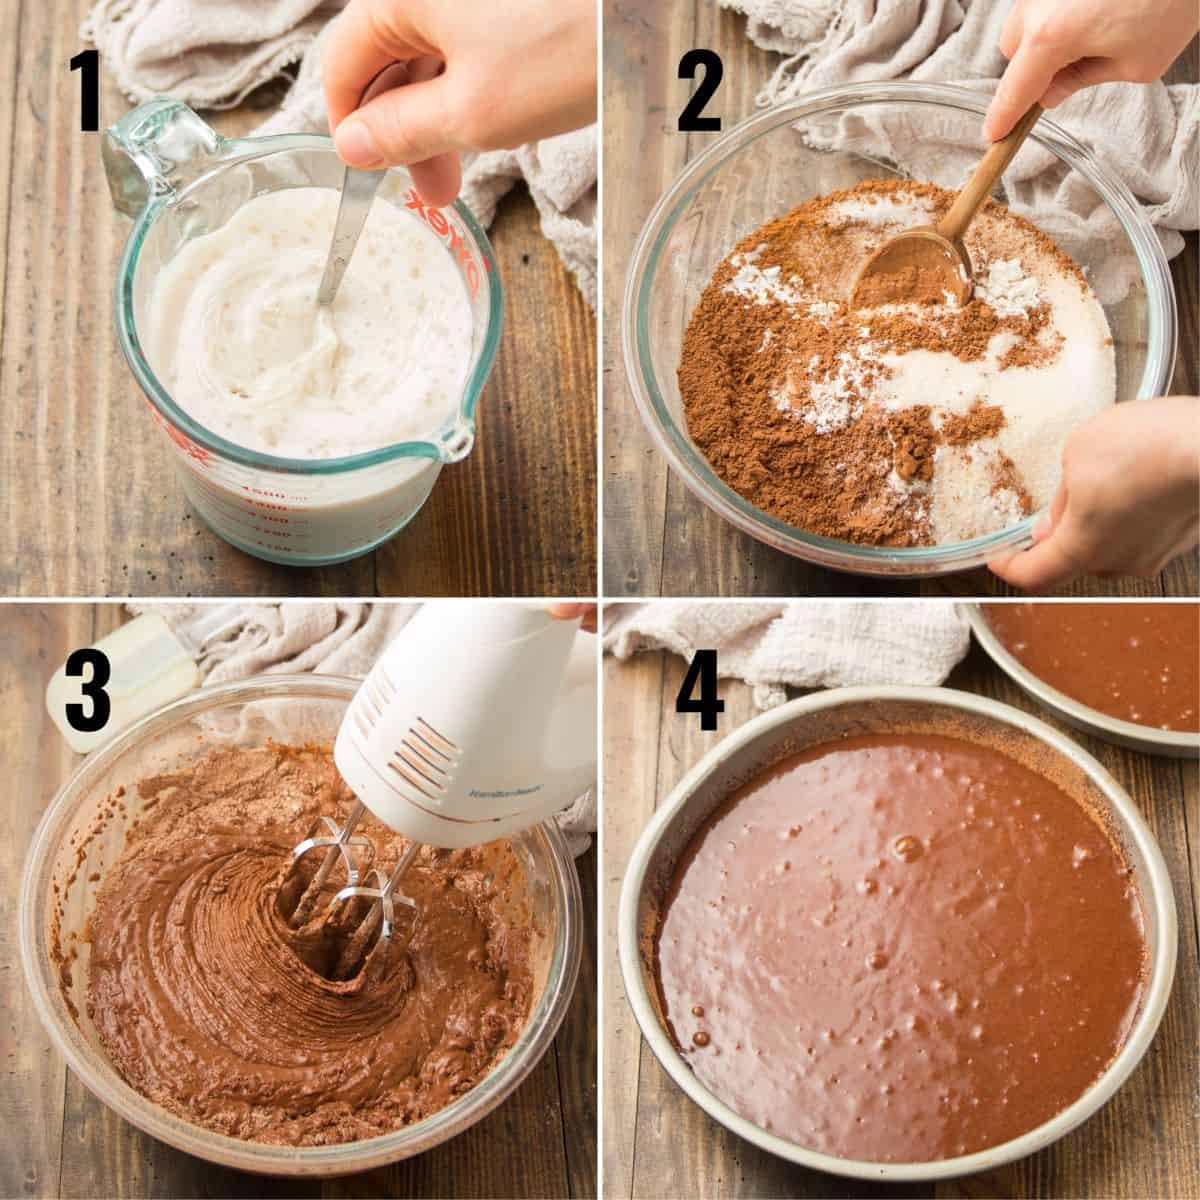 Collage Showing Steps for Making Vegan Chocolate Cake: Mix Liquid Ingredients, Mix Dry Ingredients, Beat with Mixer and Place Batter in Cake Pans